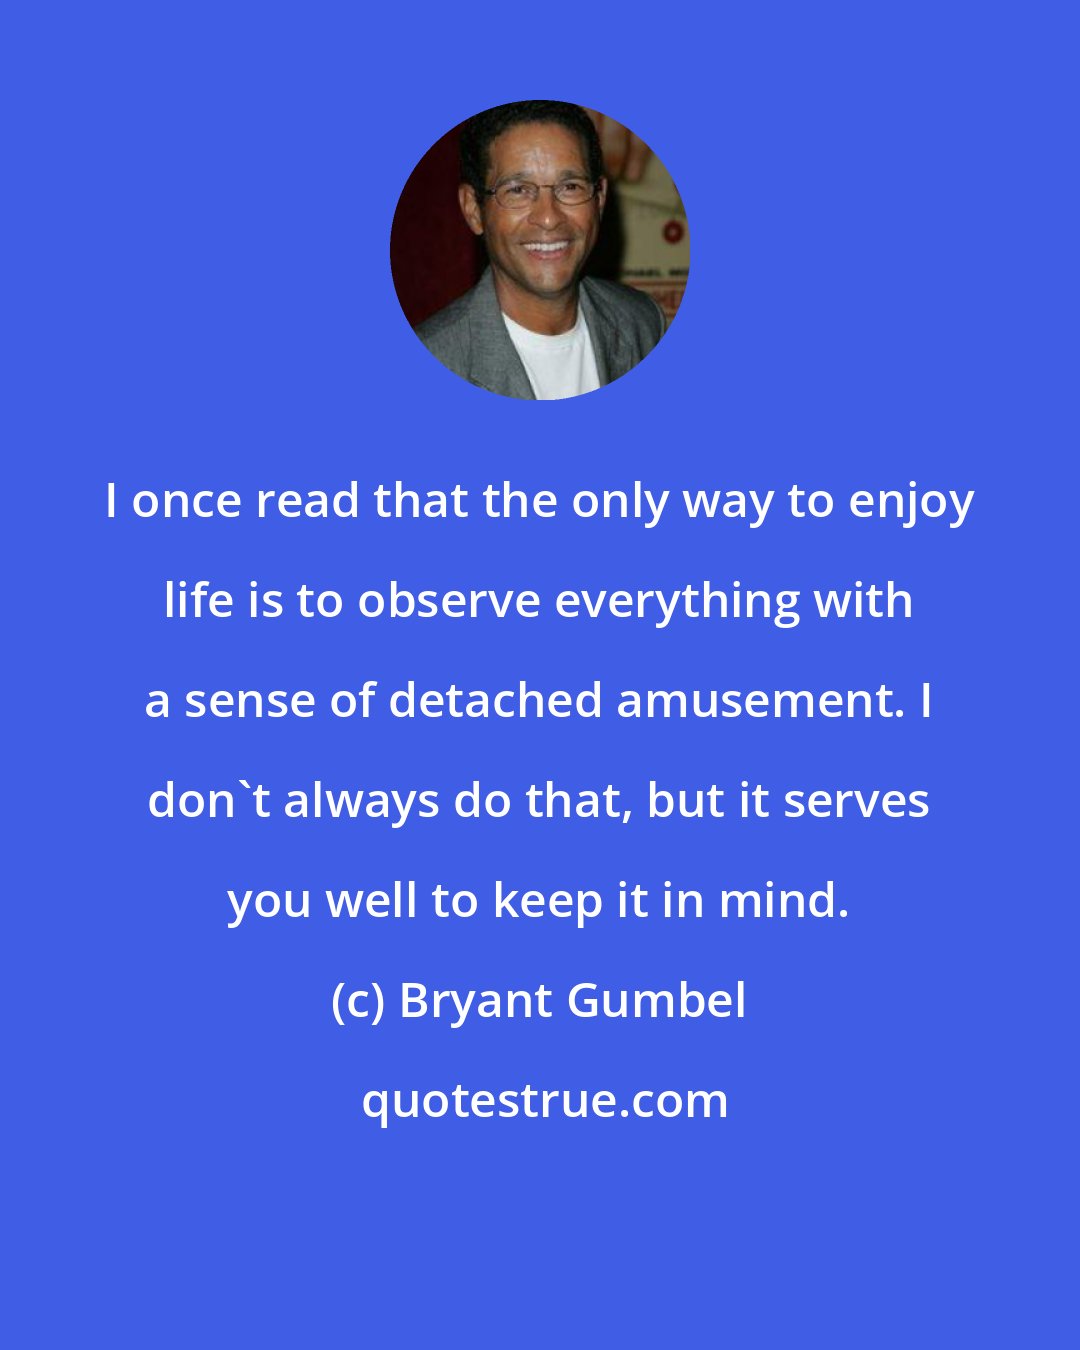 Bryant Gumbel: I once read that the only way to enjoy life is to observe everything with a sense of detached amusement. I don't always do that, but it serves you well to keep it in mind.